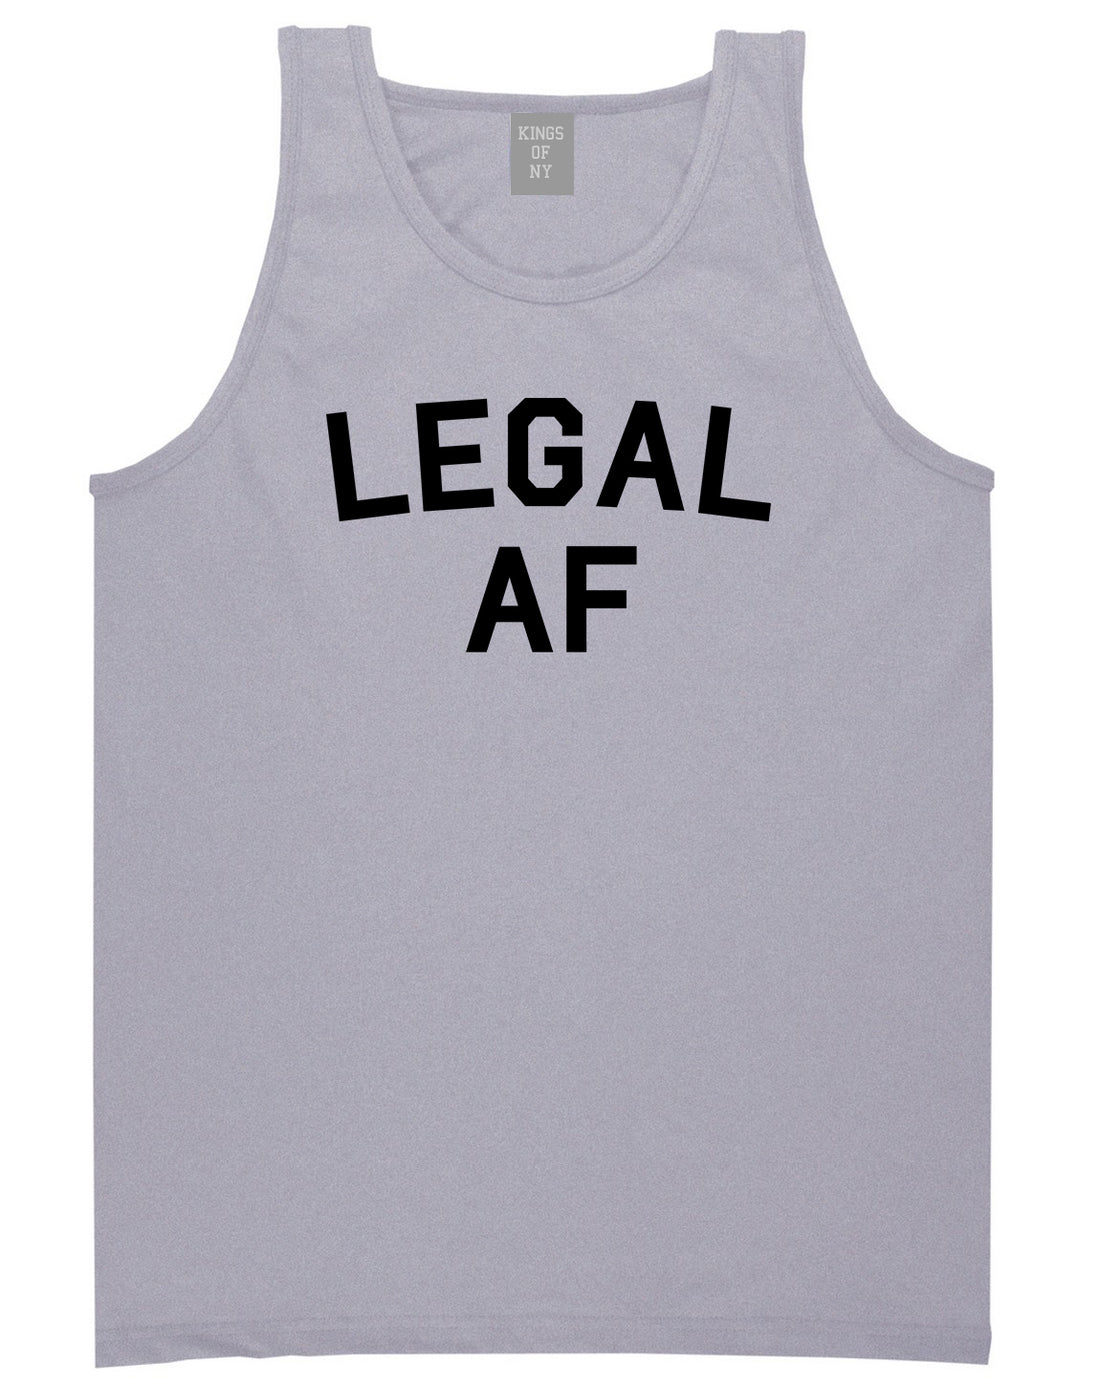 Legal AF 21st Birthday Mens Tank Top Shirt Grey by Kings Of NY